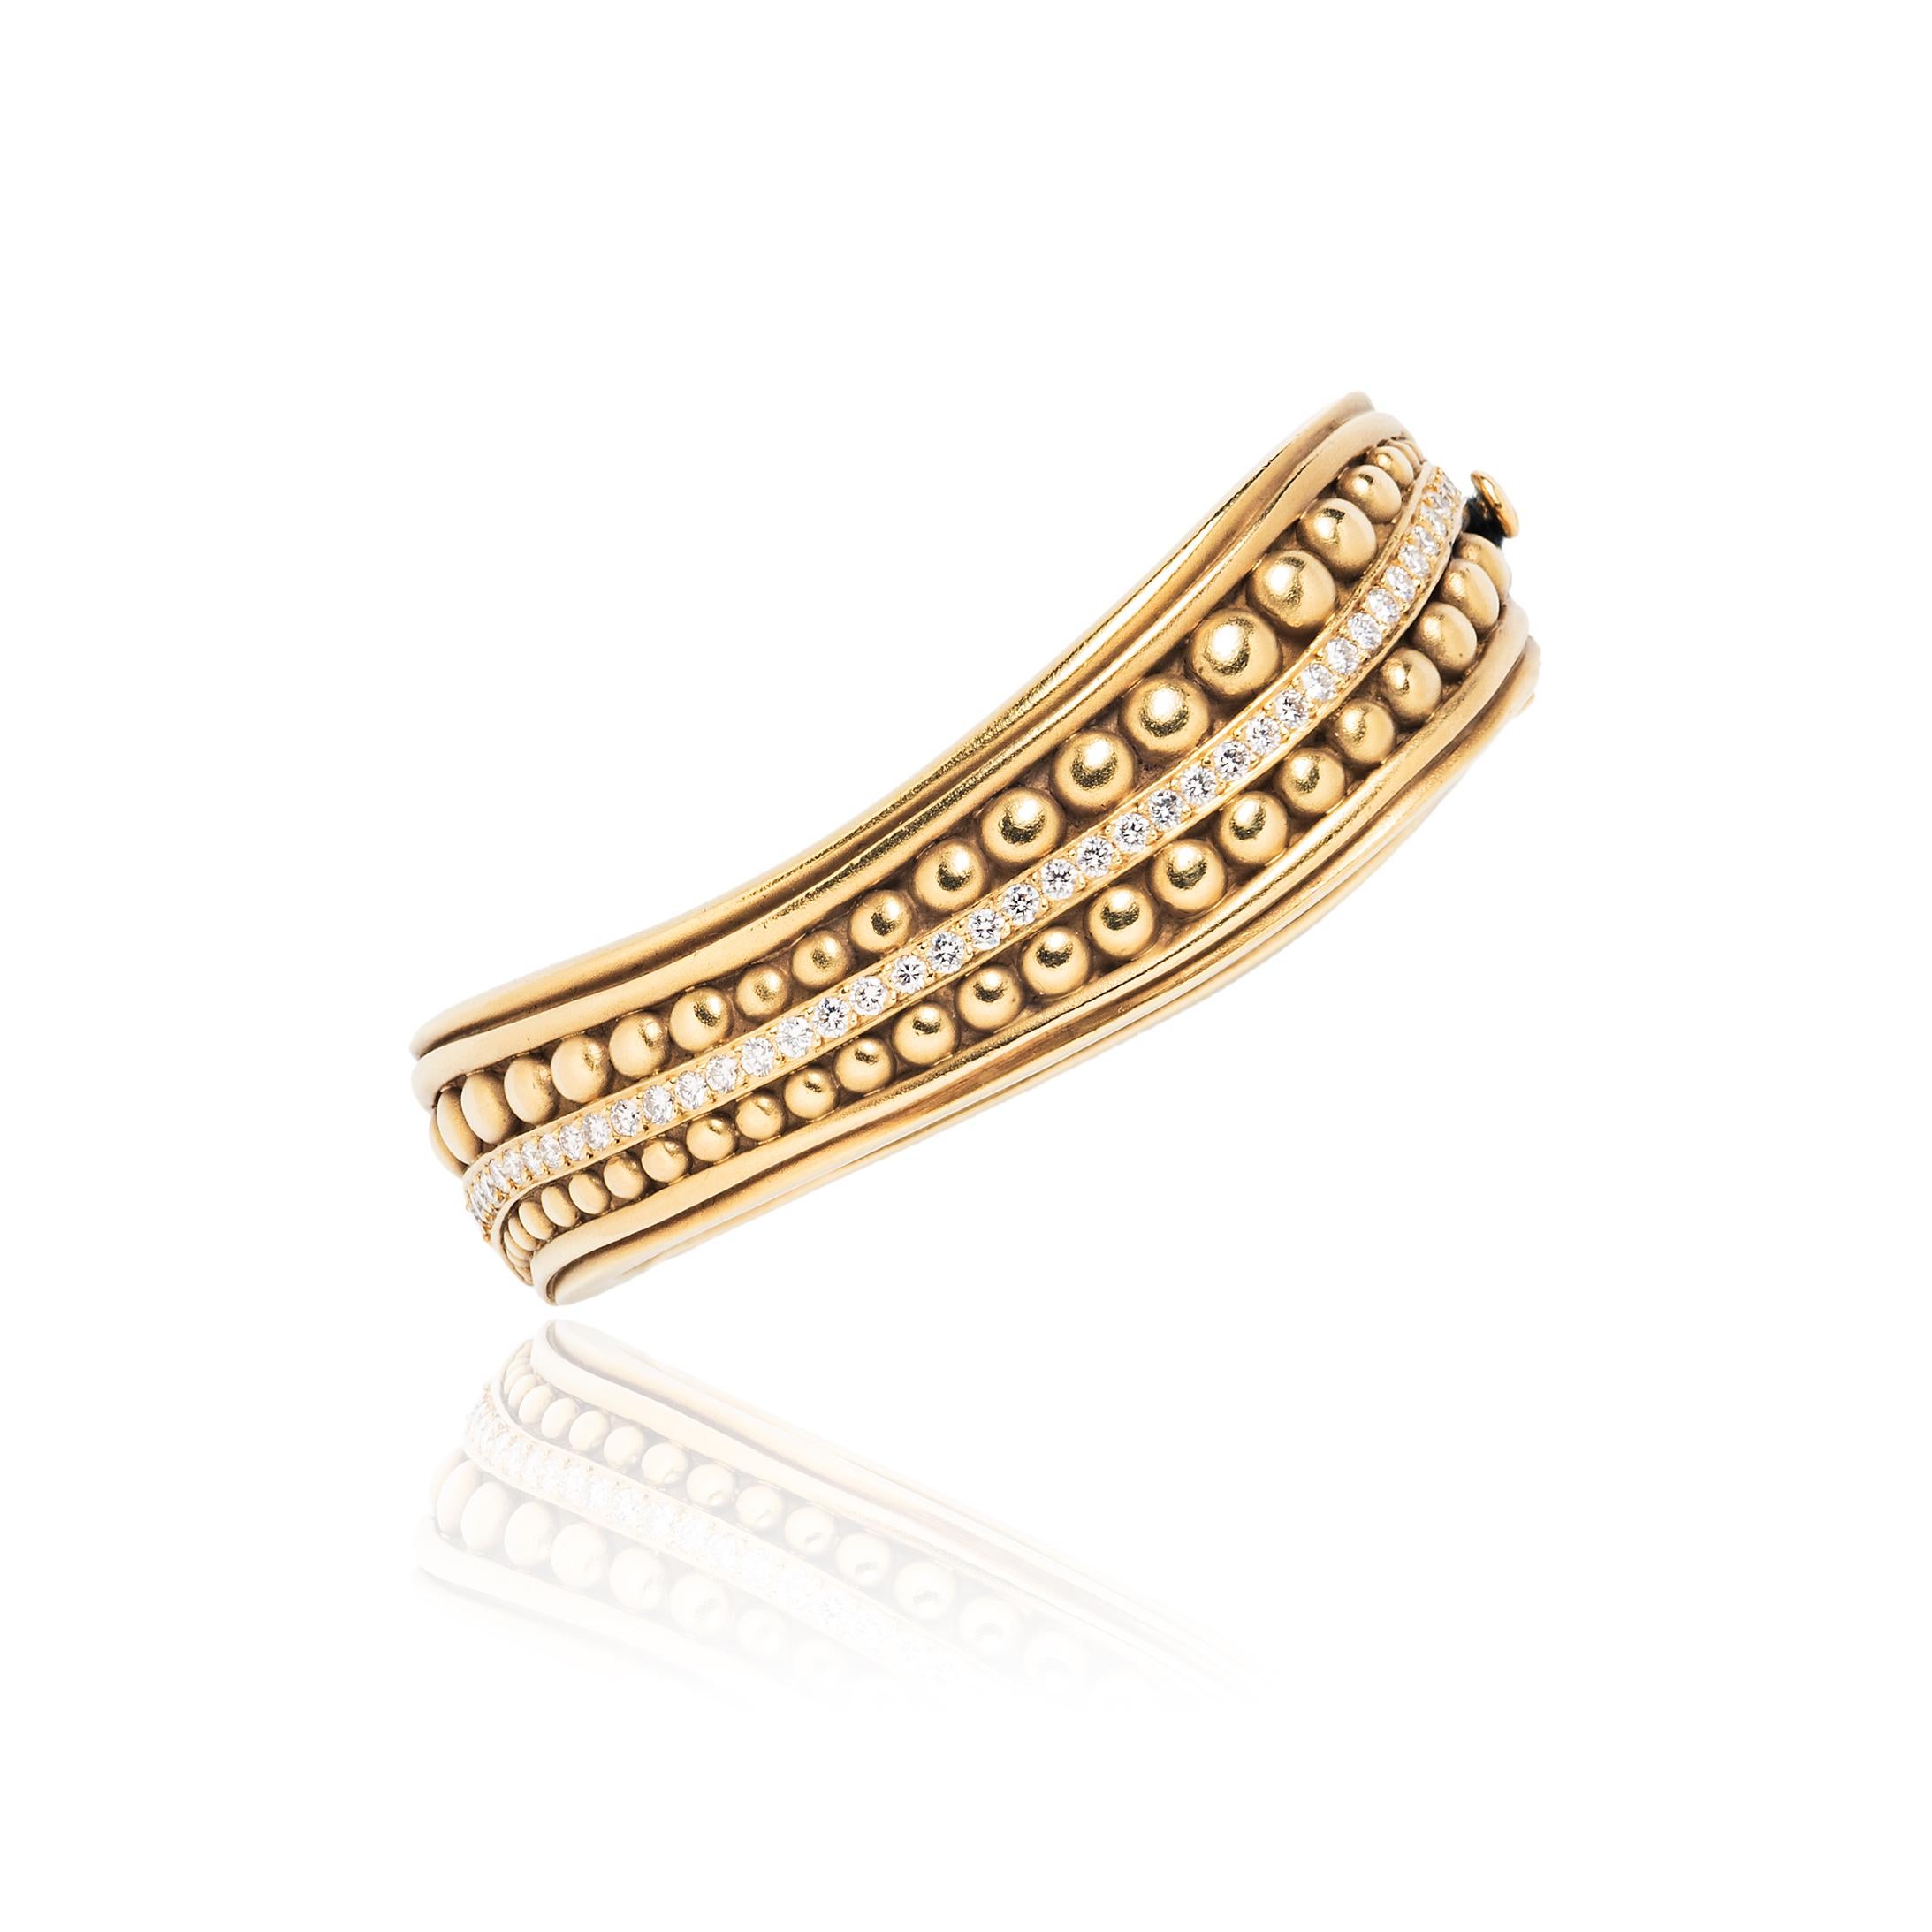 This vintage caviar bangle from famed jeweler Barry Kieselstein-Cord is made of solid, hammered 18k gold accented by a sweep of round brilliant cut diamonds. It has an elegant sculptural shape with grooved and beaded textures.  

- Interior